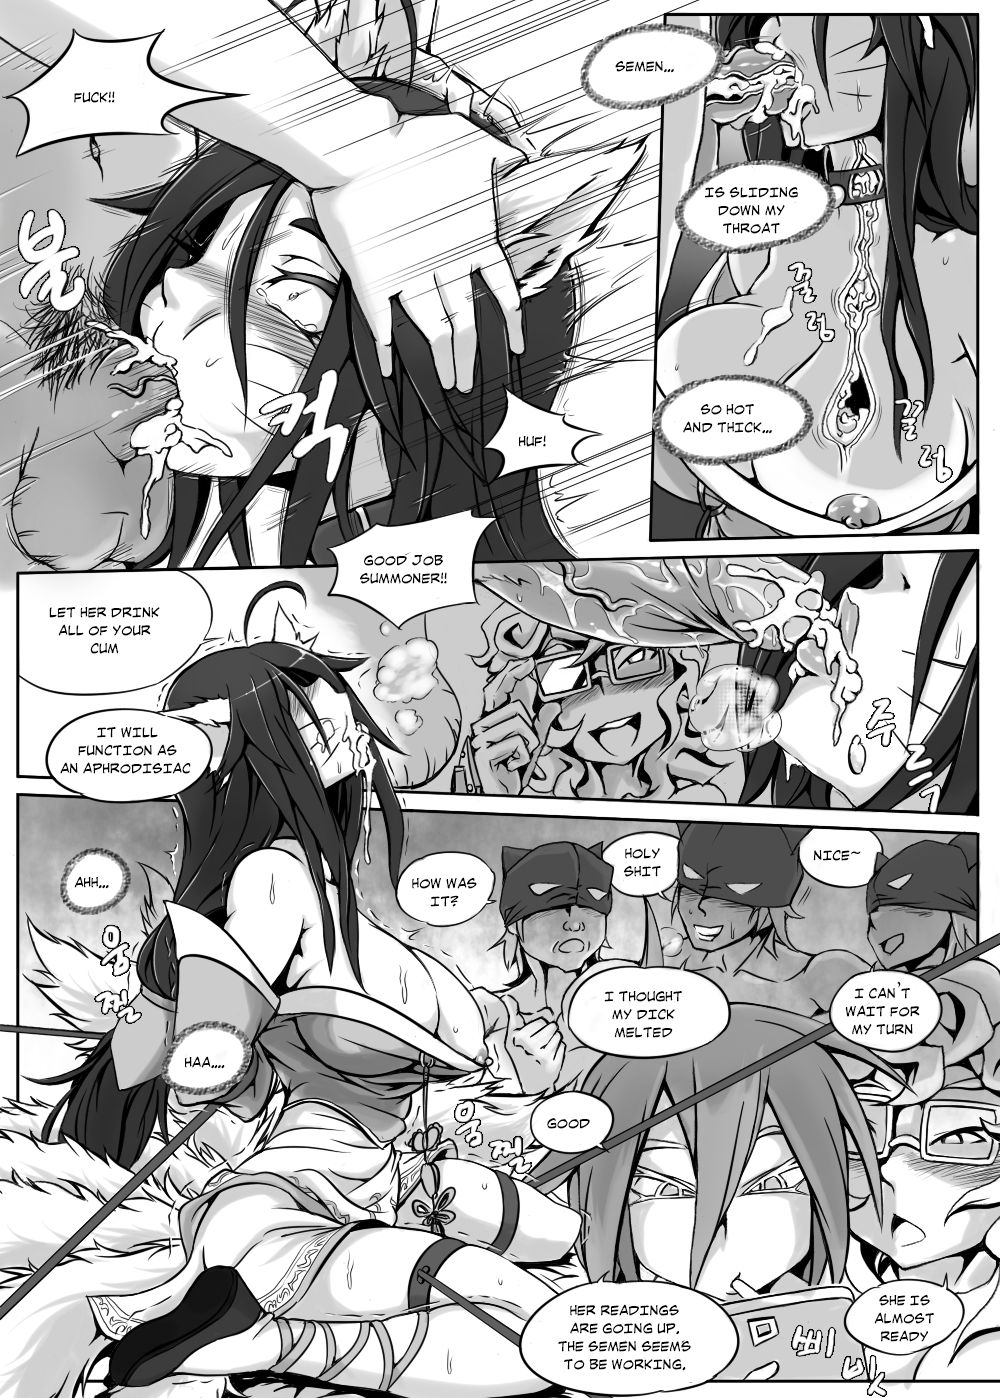 [KimMundo (Zone)] Heimerdinger Workshop (League of Legends) [English] (Partly colored) (Ongoing) page 13 full